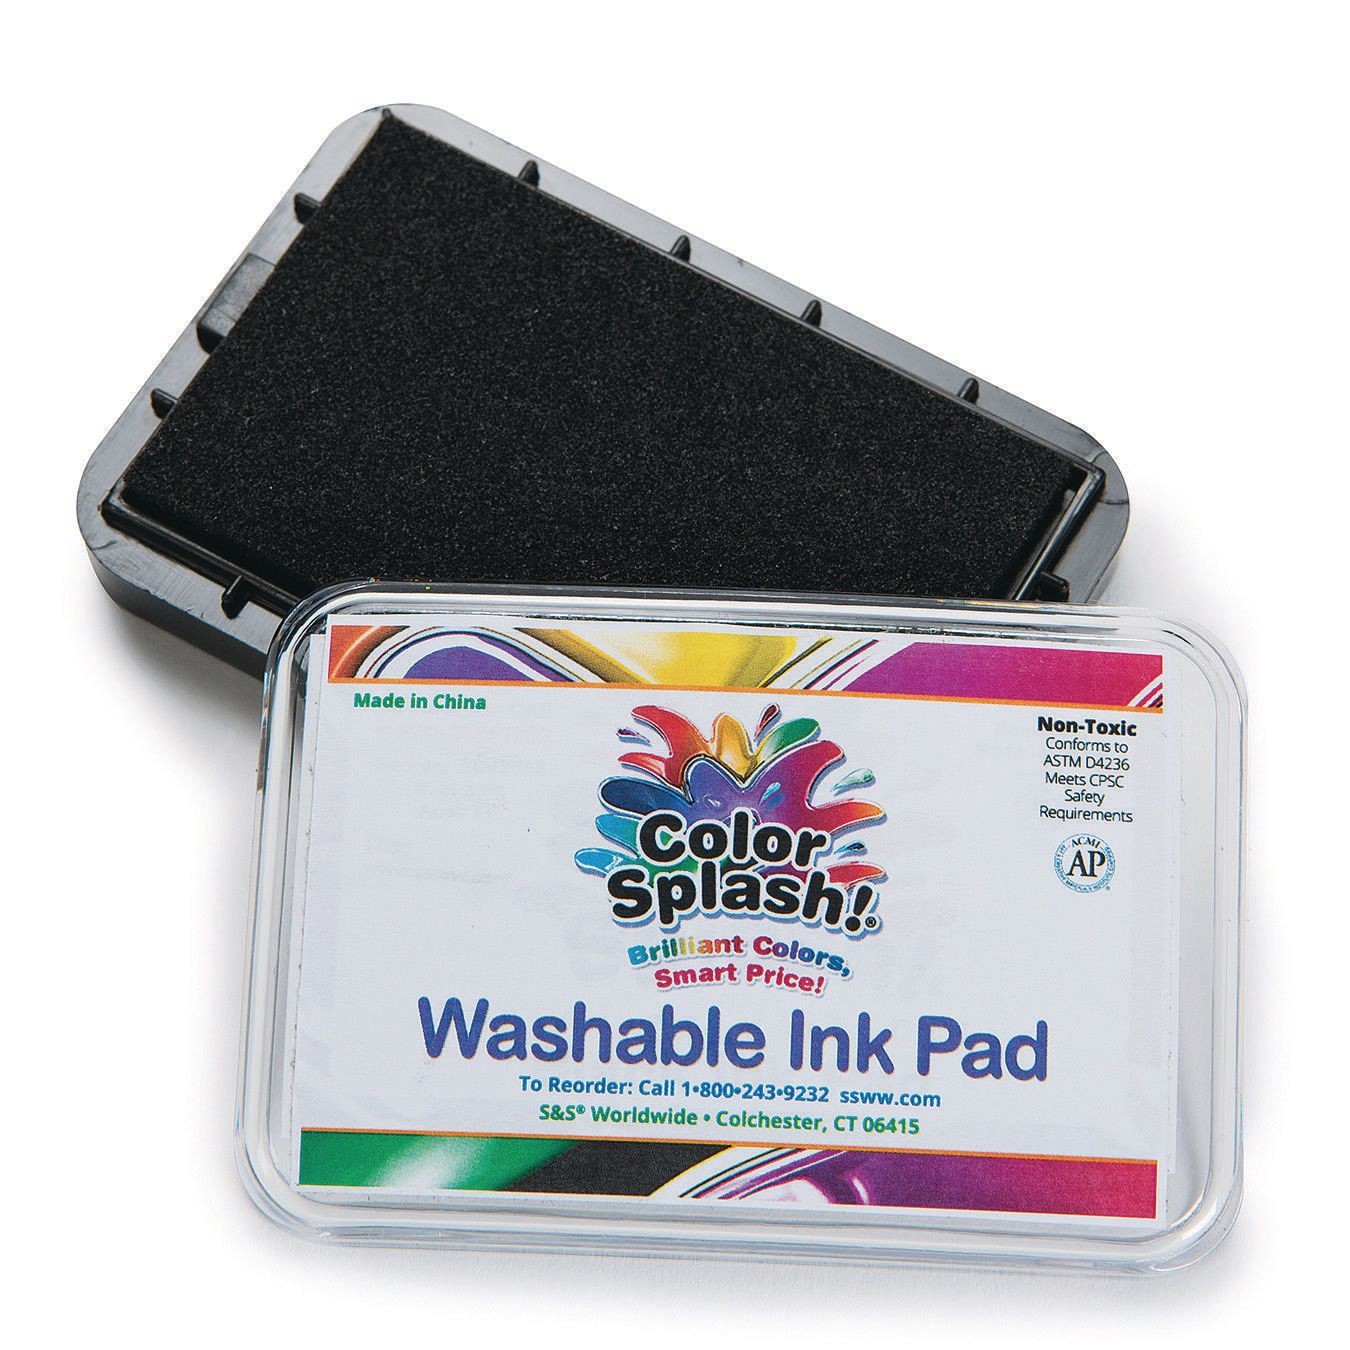 Ink Pad Color Gradual Change Inkpad For Stamp 4 Orders - Buy Ink Pad Color  Gradual Change Inkpad For Stamp 4 Orders Product on